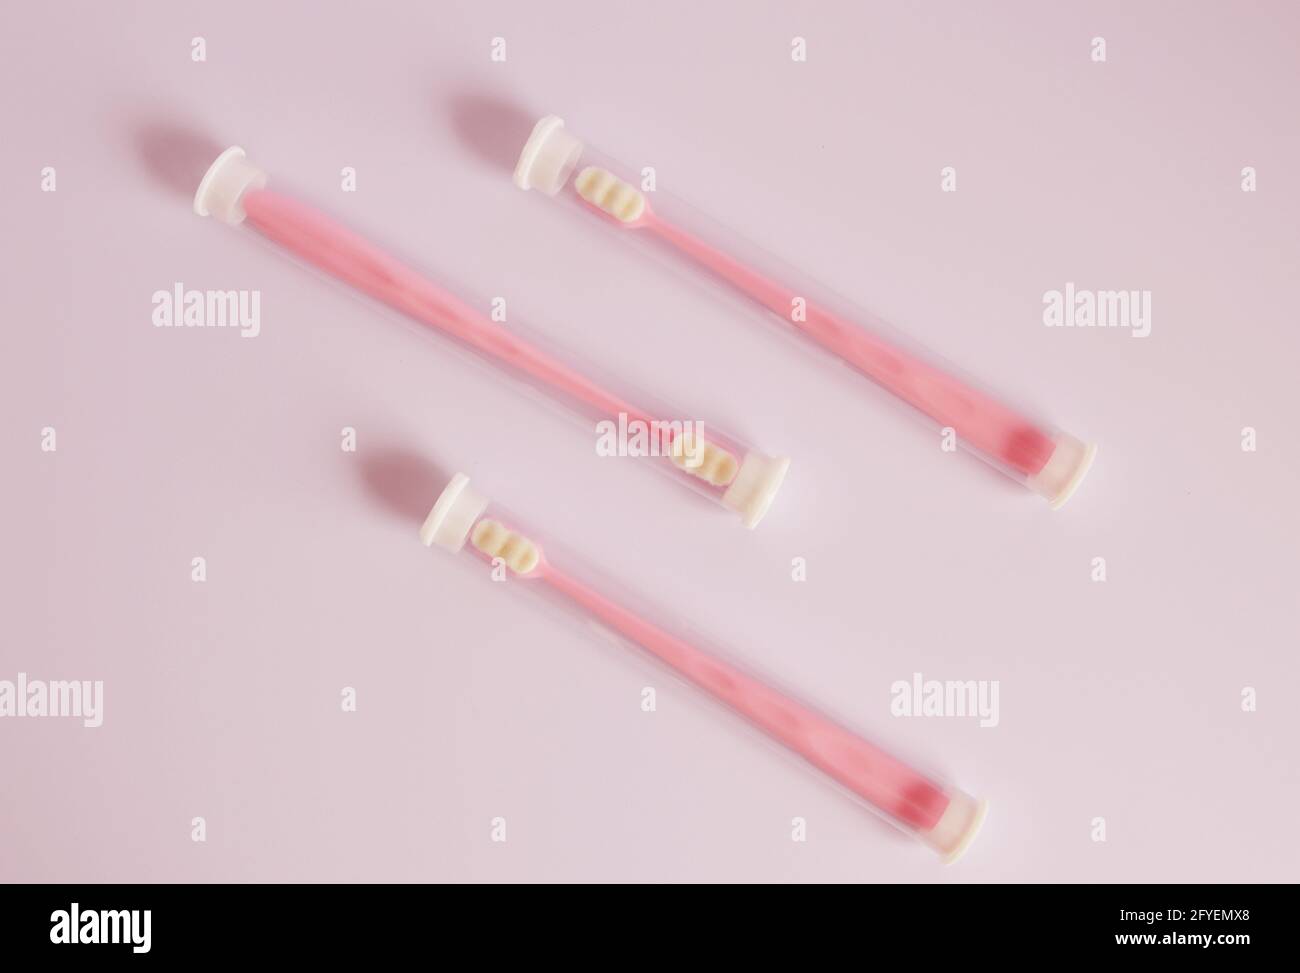 Tint pink colour superfine Japanese style toothbrushes Stock Photo